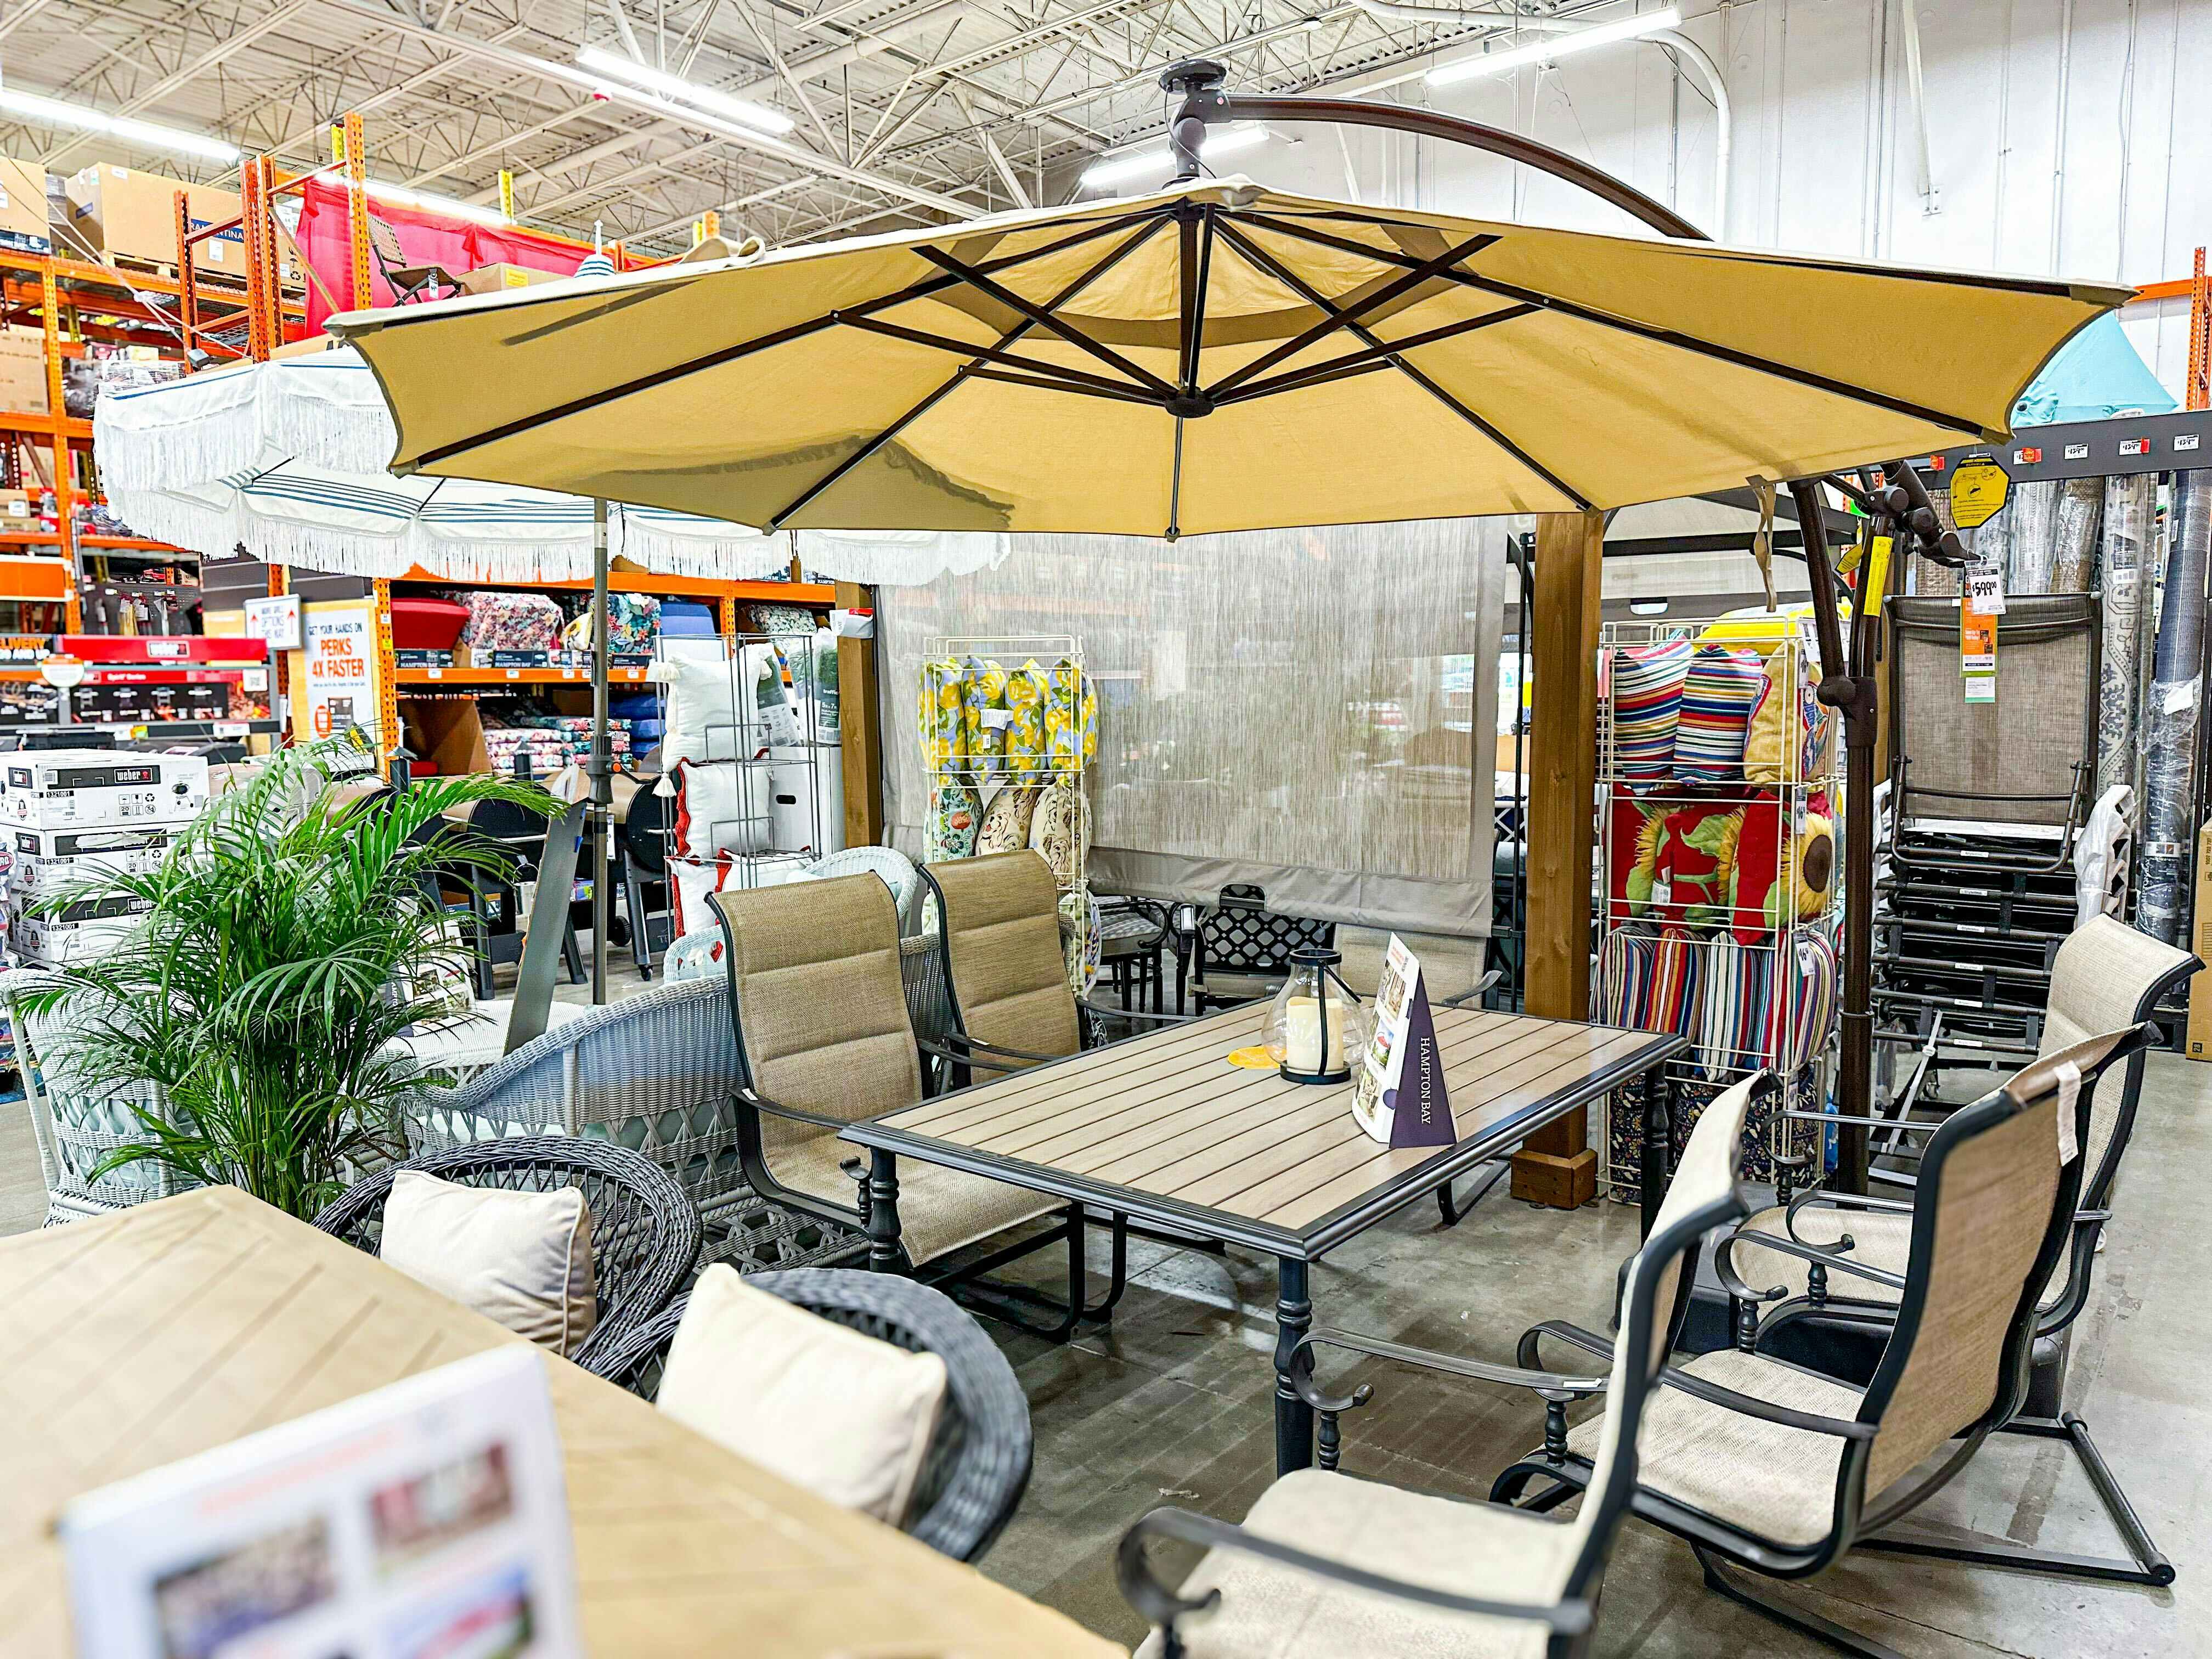 Outdoor Furniture Sets, as Low as $45 at Home Depot